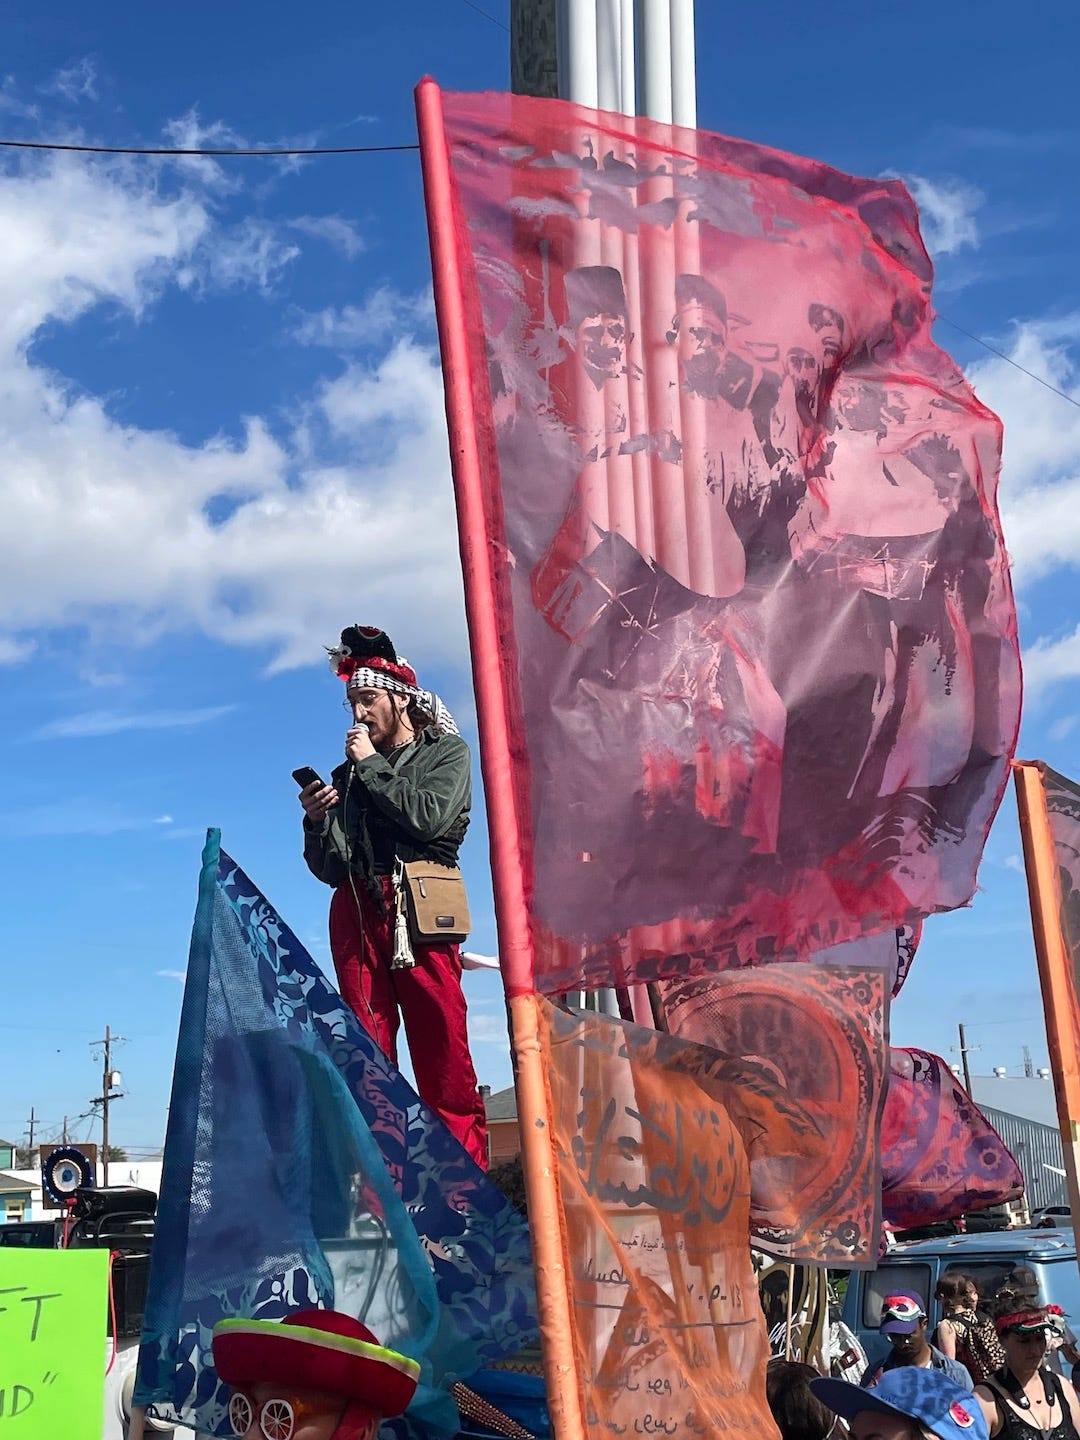 Krewe of Chickpeas speaker Marco Saah is addressing the crowd. He is standing on a box speaking into a microphone and wears a black and white keffiyeh on their head, a green jacket, and red pants. In front of them is a silk-screened flag of a traditional Palestinian band.